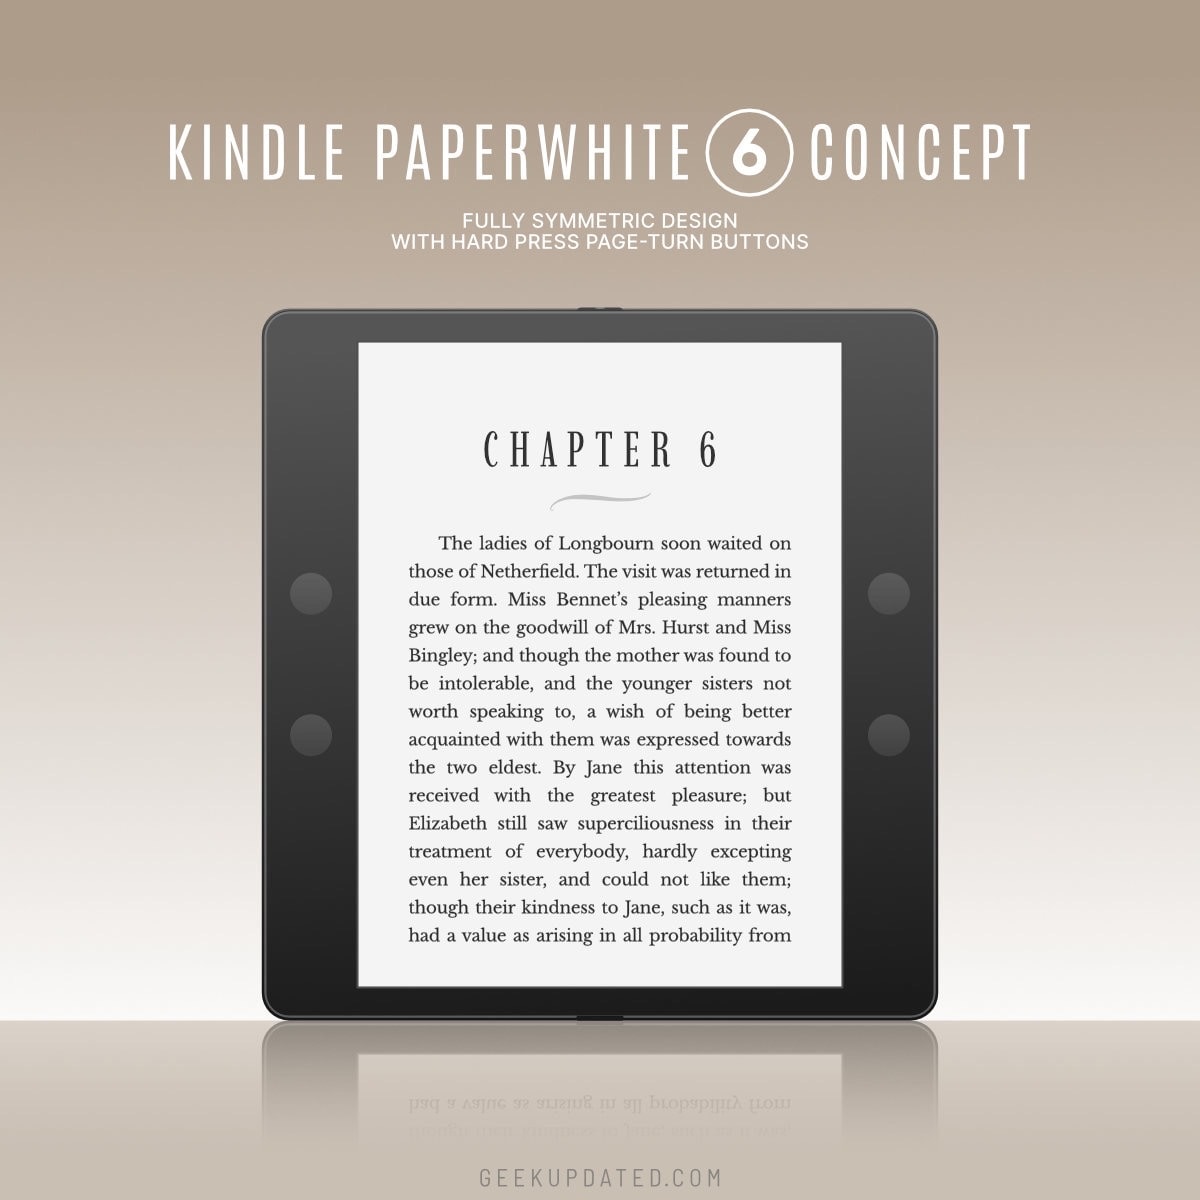 Next-generation Kindle Paperwhite concept and features